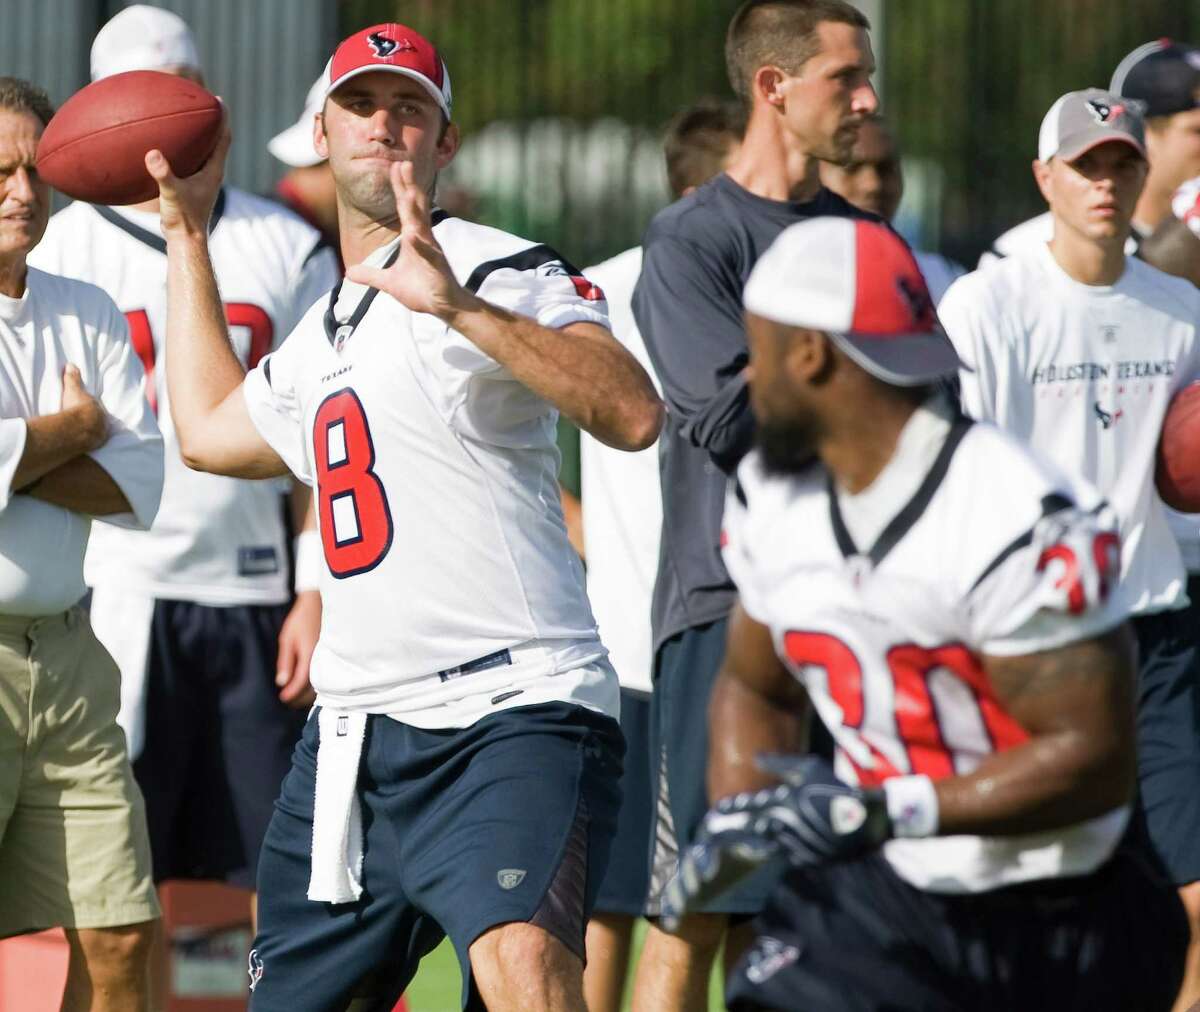 Texans quarterback Matt Schaub (8) reaches back to throw a pass with running back Ahman Green (30) in the foreground during Texans training camp Thursday, Aug. 7, 2008, in Houston.